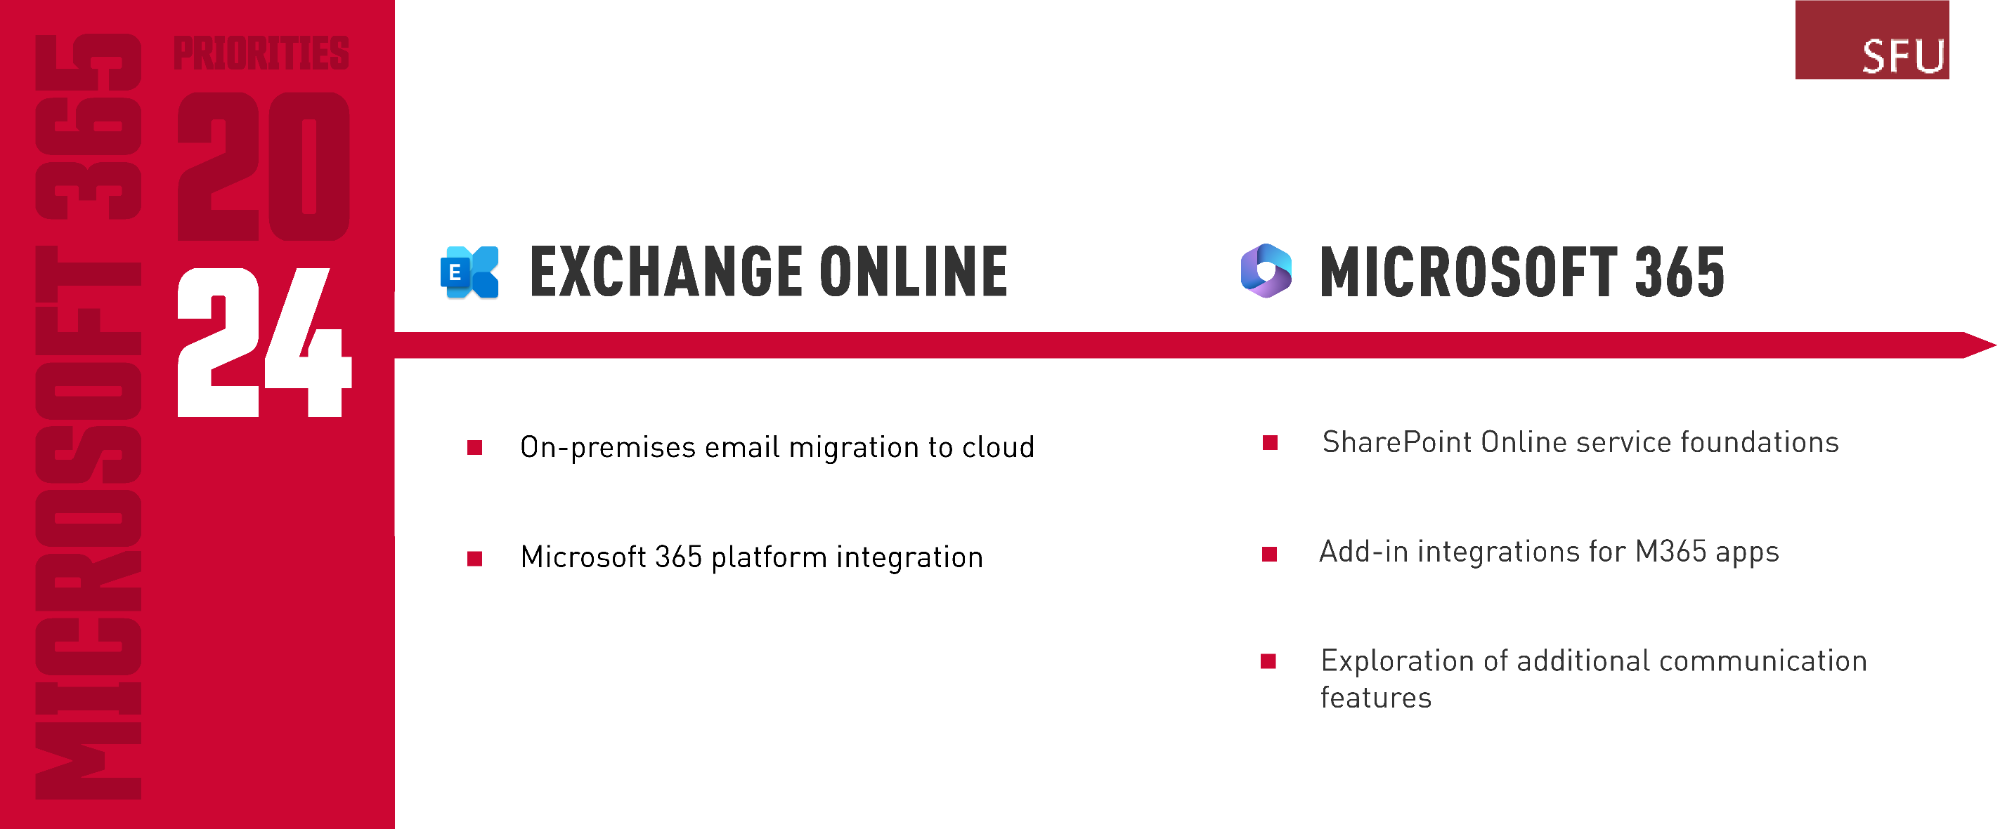 An image showing the SFU priorities for Microsoft 365 for 2023. On the image are two titles for Exchange Online and Microsoft 365. Exchange Online has the subpoints, "On-premises email migration to cloud", "Microsoft 365 platform integration". Microsoft 365 has the subpoints, "SharePoint Online service foundations", "Add-in integrations for M365 apps", "Exploration of additional communication features".